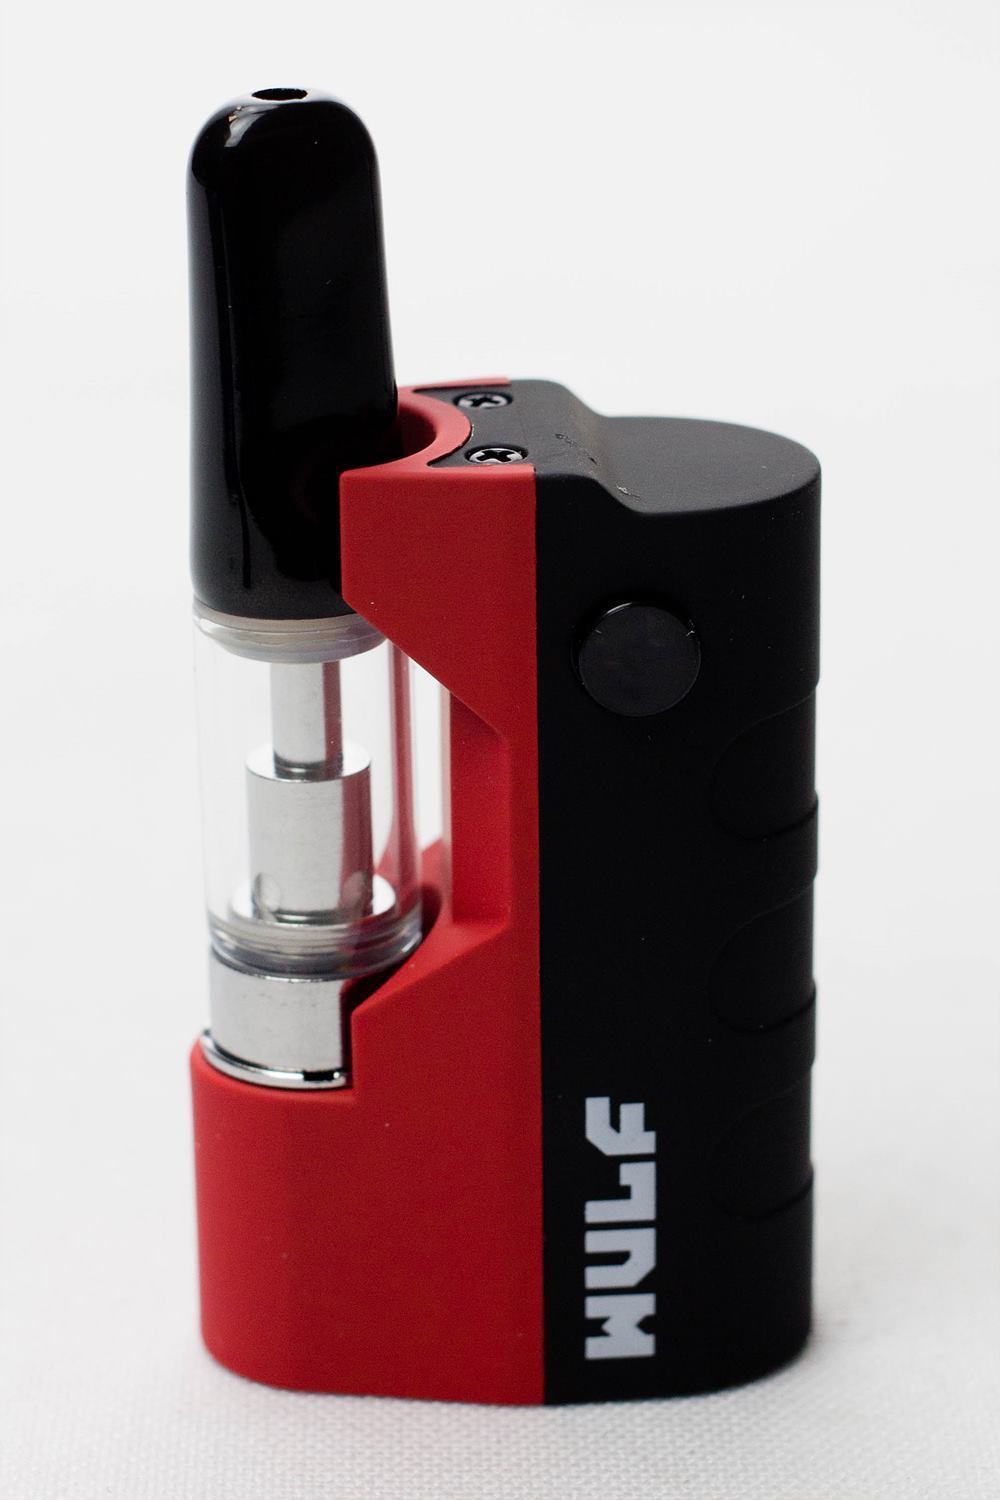 Wulf Micro Cartridge Vaporizer Flower Power Packages Red-4118 